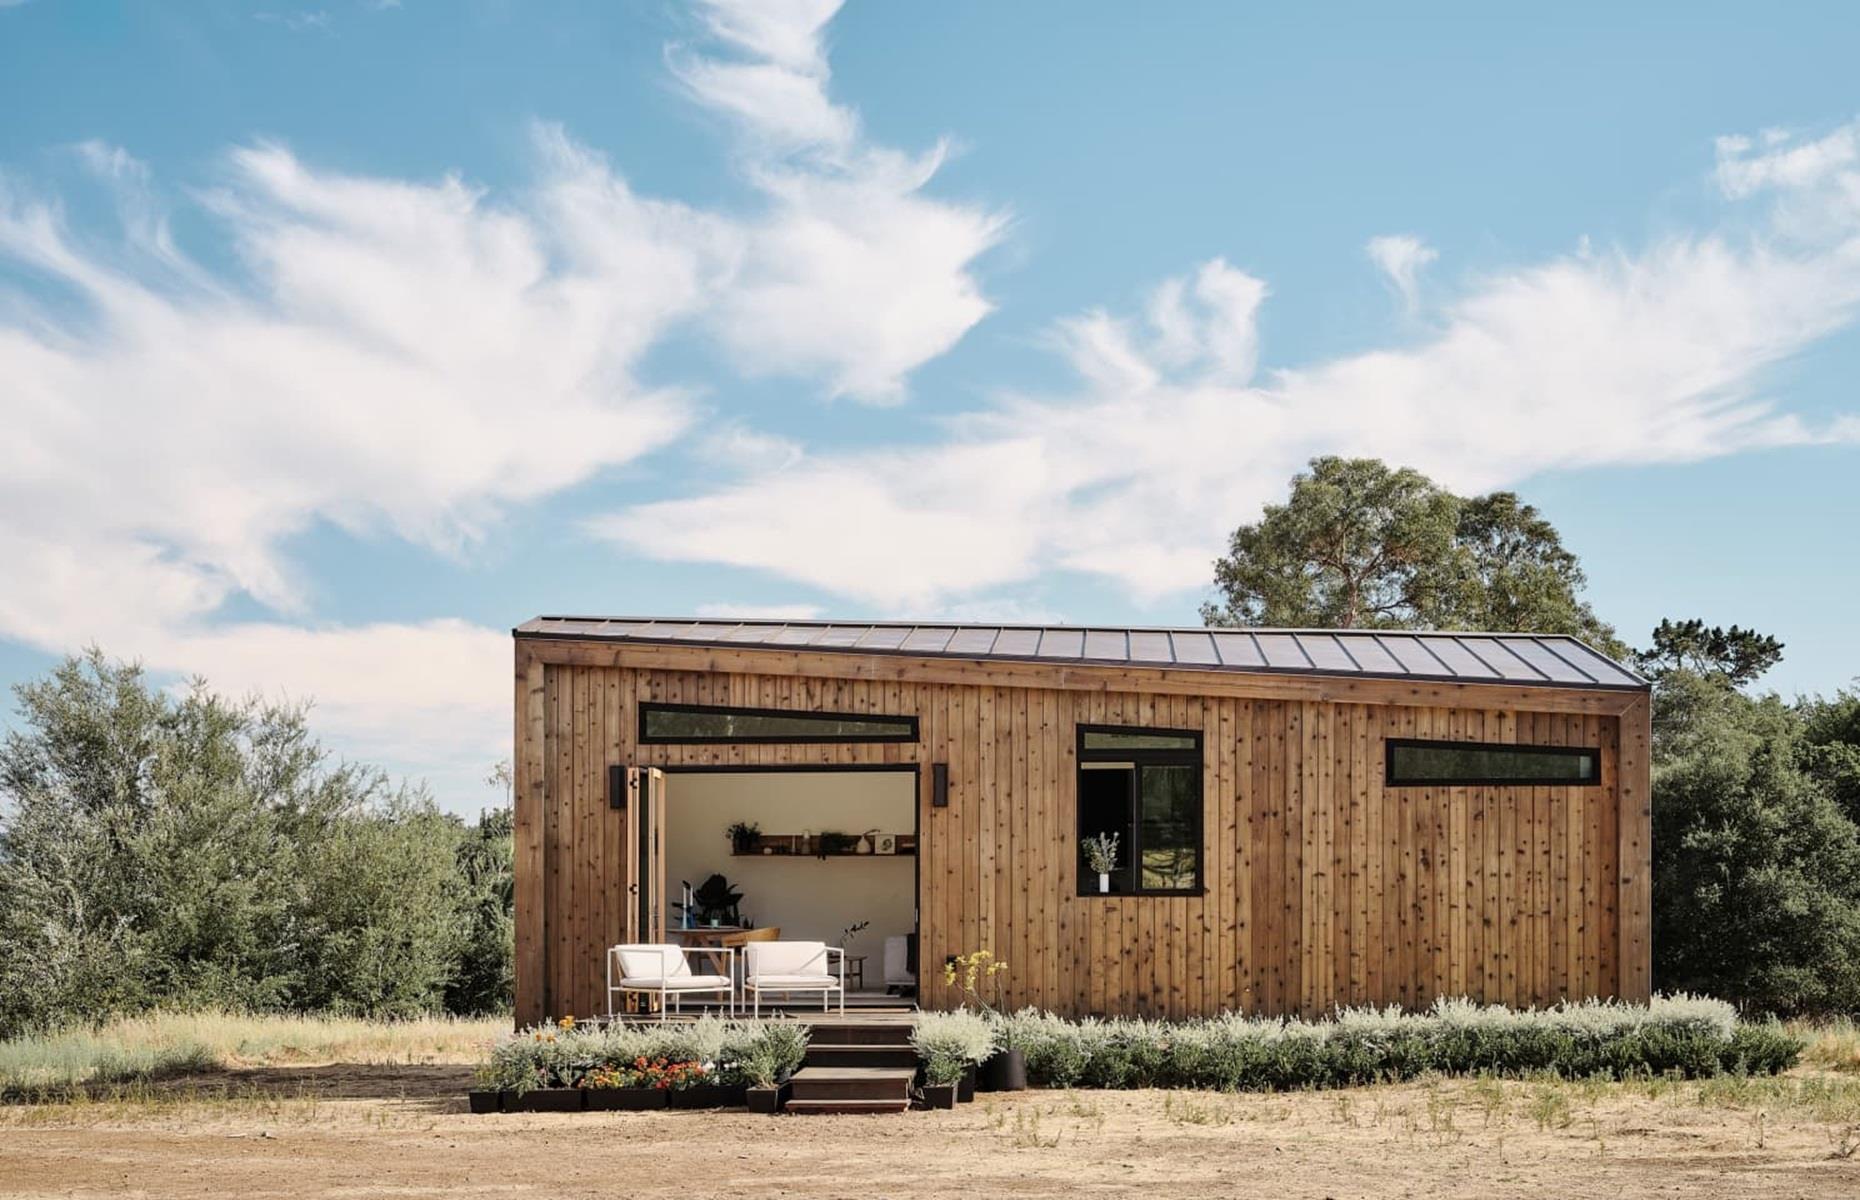 <p>Named one of the best tiny homes of 2019 by Dwell, this stunning property can be installed in a backyard in just two weeks. Tiny home manufacturers <a href="https://www.abodu.com/dwellhouse">Abodu</a> designed the pad in collaboration with Dwell and Norm Architects to create more housing in dense urban areas in a very short space of time.</p>